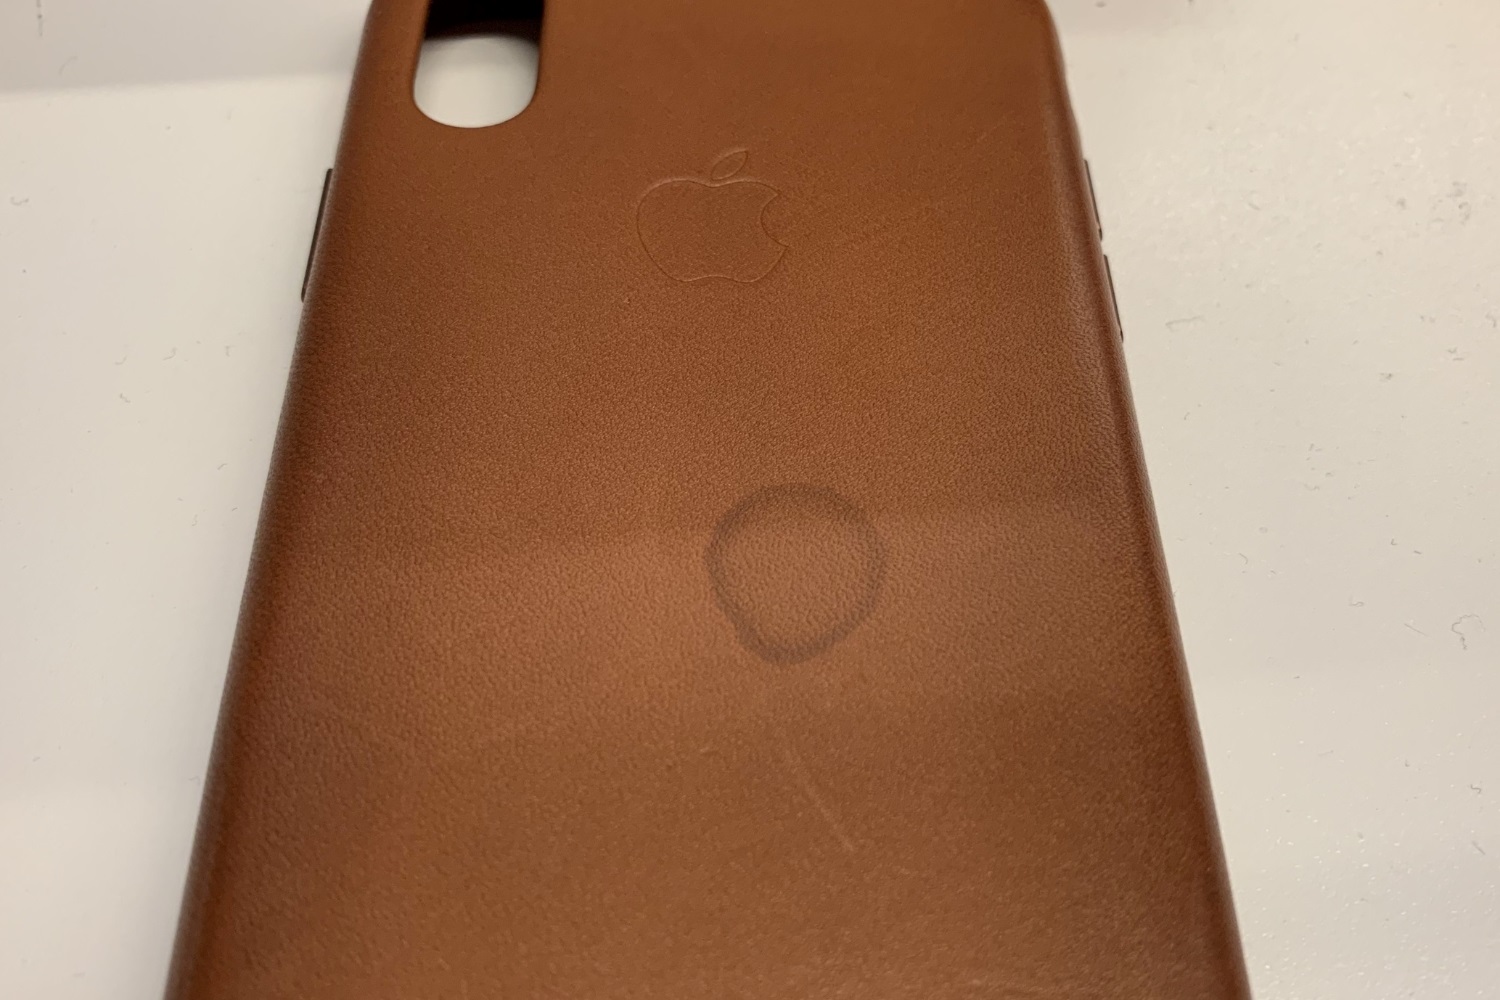 removing-unwanted-marks-from-your-phone-case